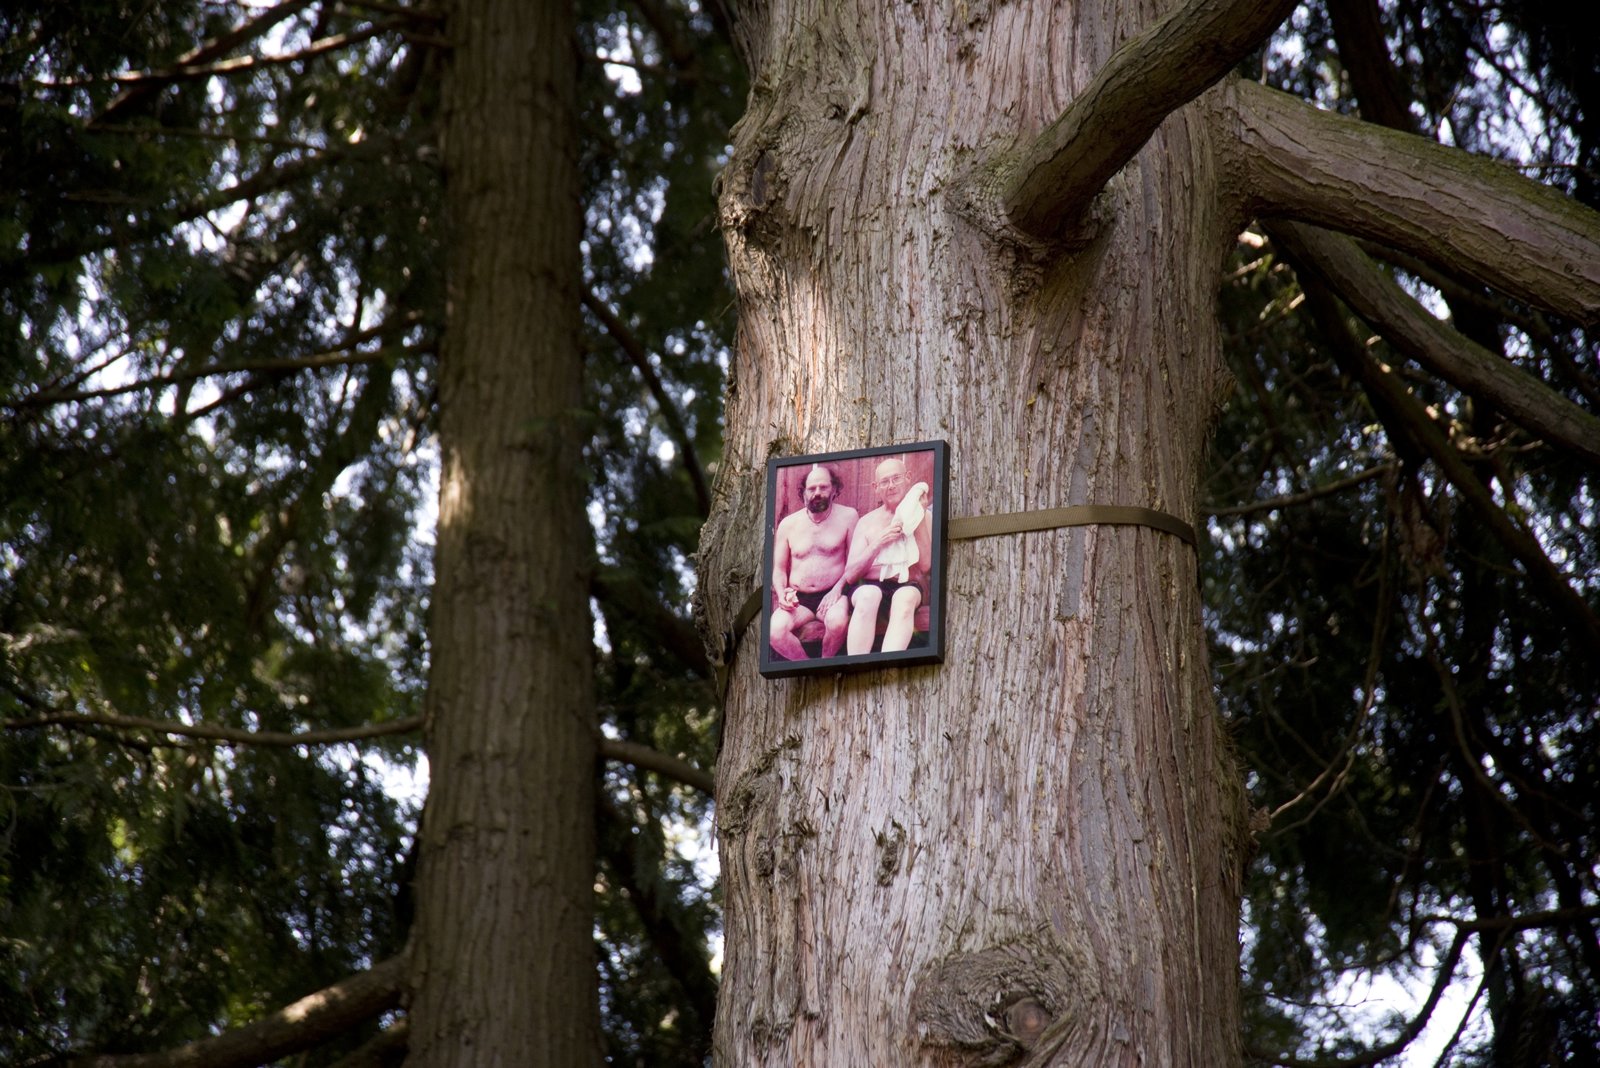 Geoffrey Farmer, If You Want To See Something Look at Something Else (Allen Ginsberg 1926–1997), 2011, 50 colour photographs mounted on perspex, framed, dimensions variable. Installation view, Volunteer Park, Seattle, USA, 2019